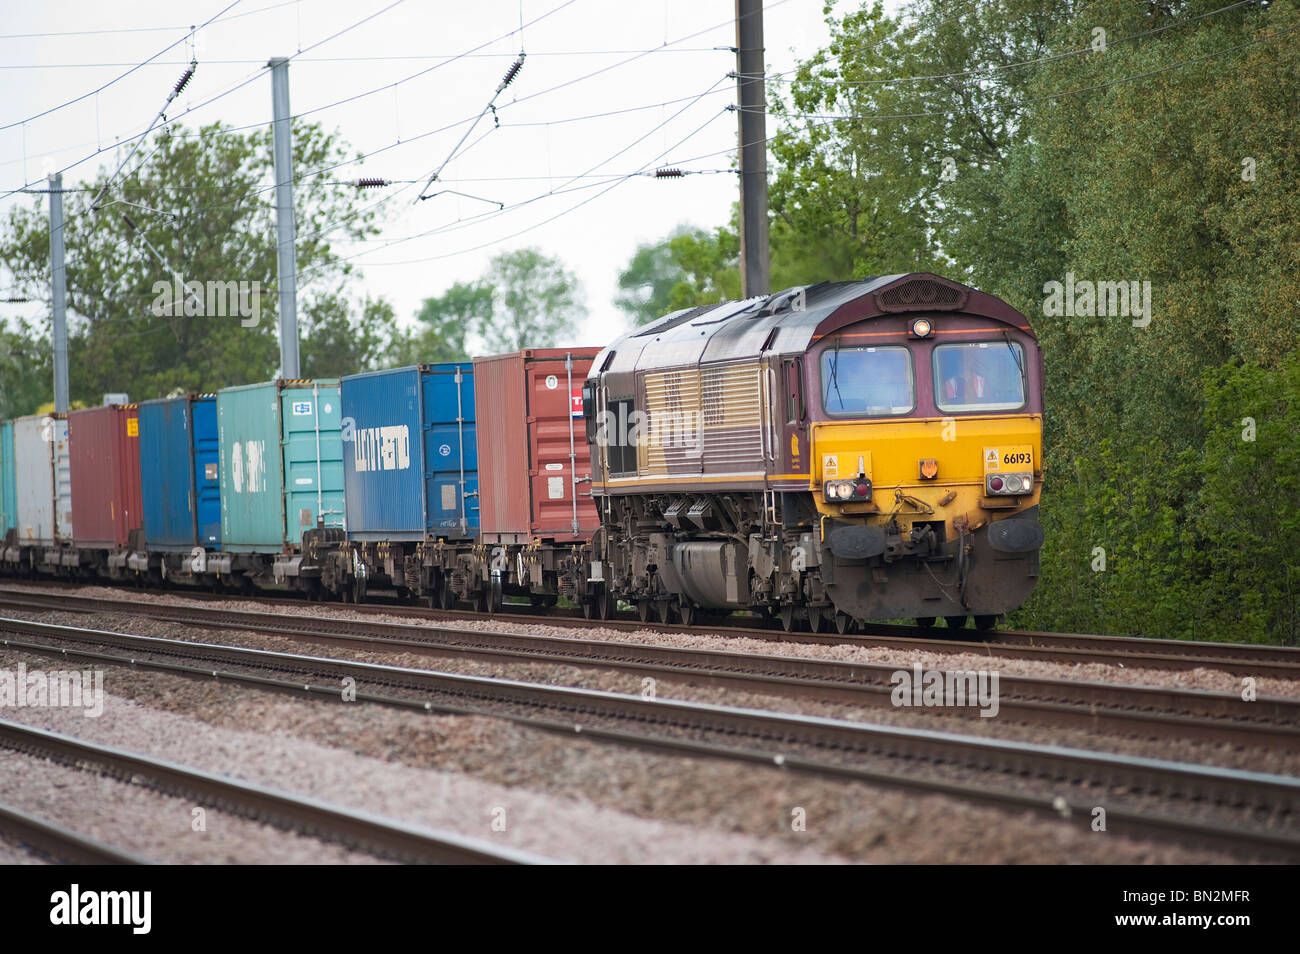 English welsh and scottish railways class 66 locomotive hauling freight containers on a freight train on the english railway. Stock Photo